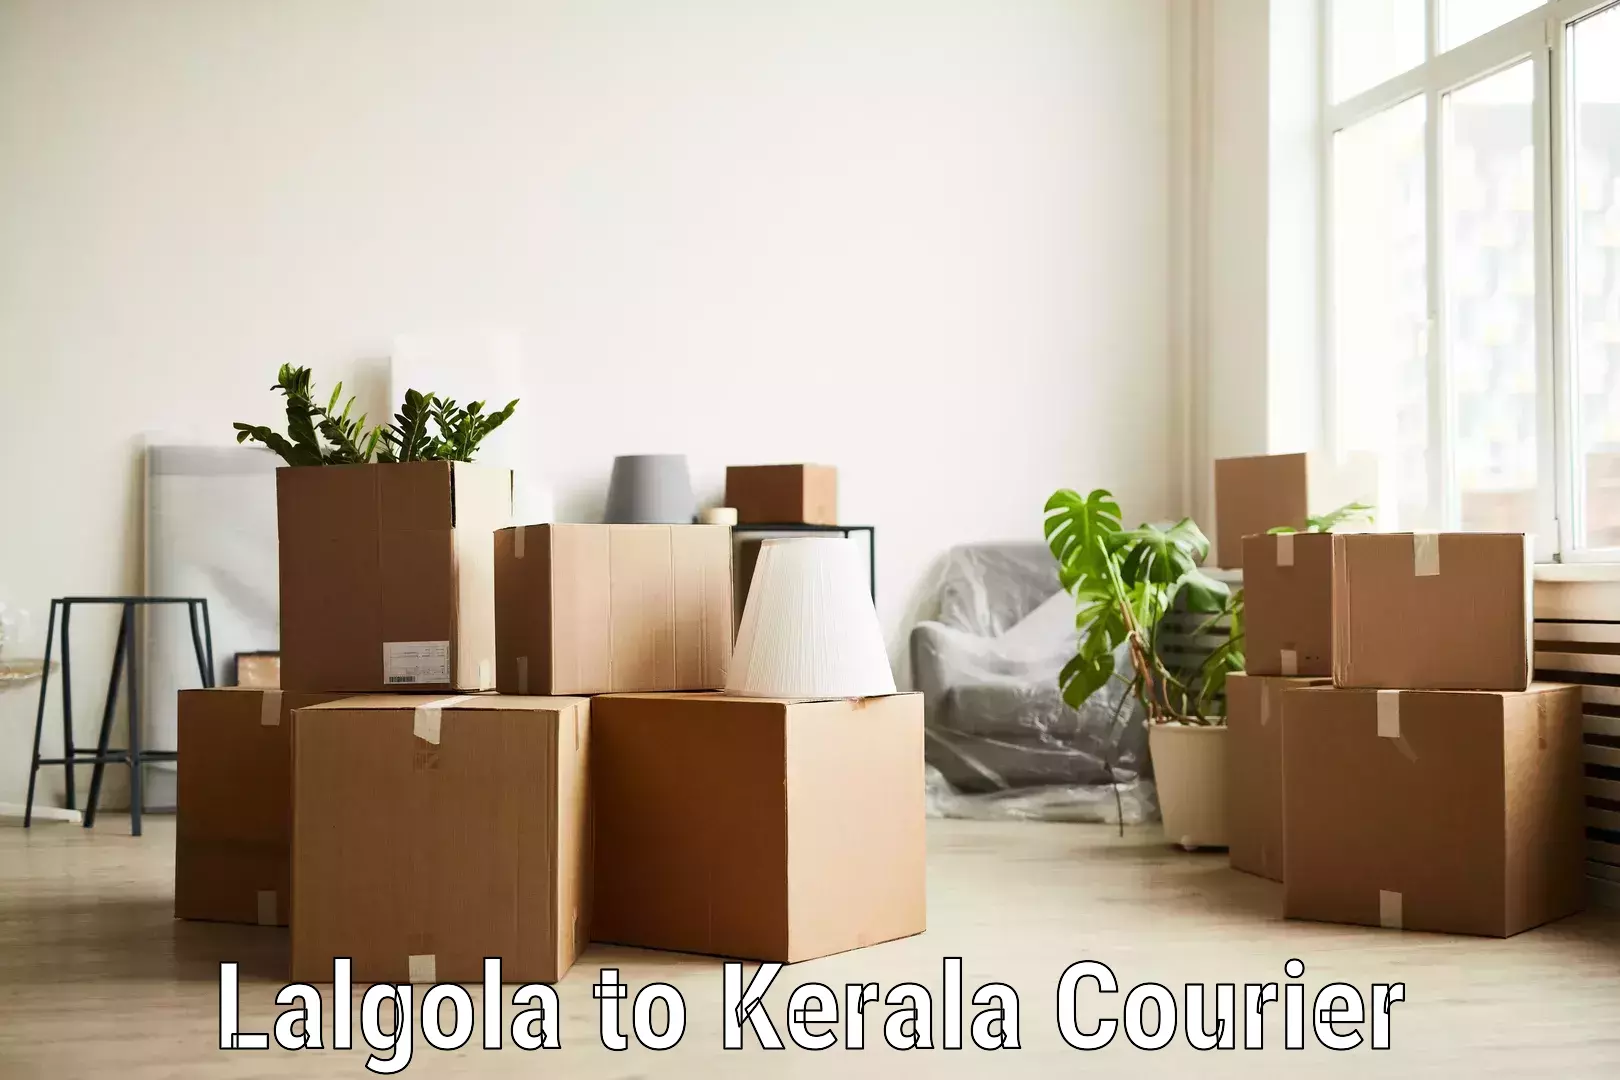 Specialized shipment handling Lalgola to Kerala